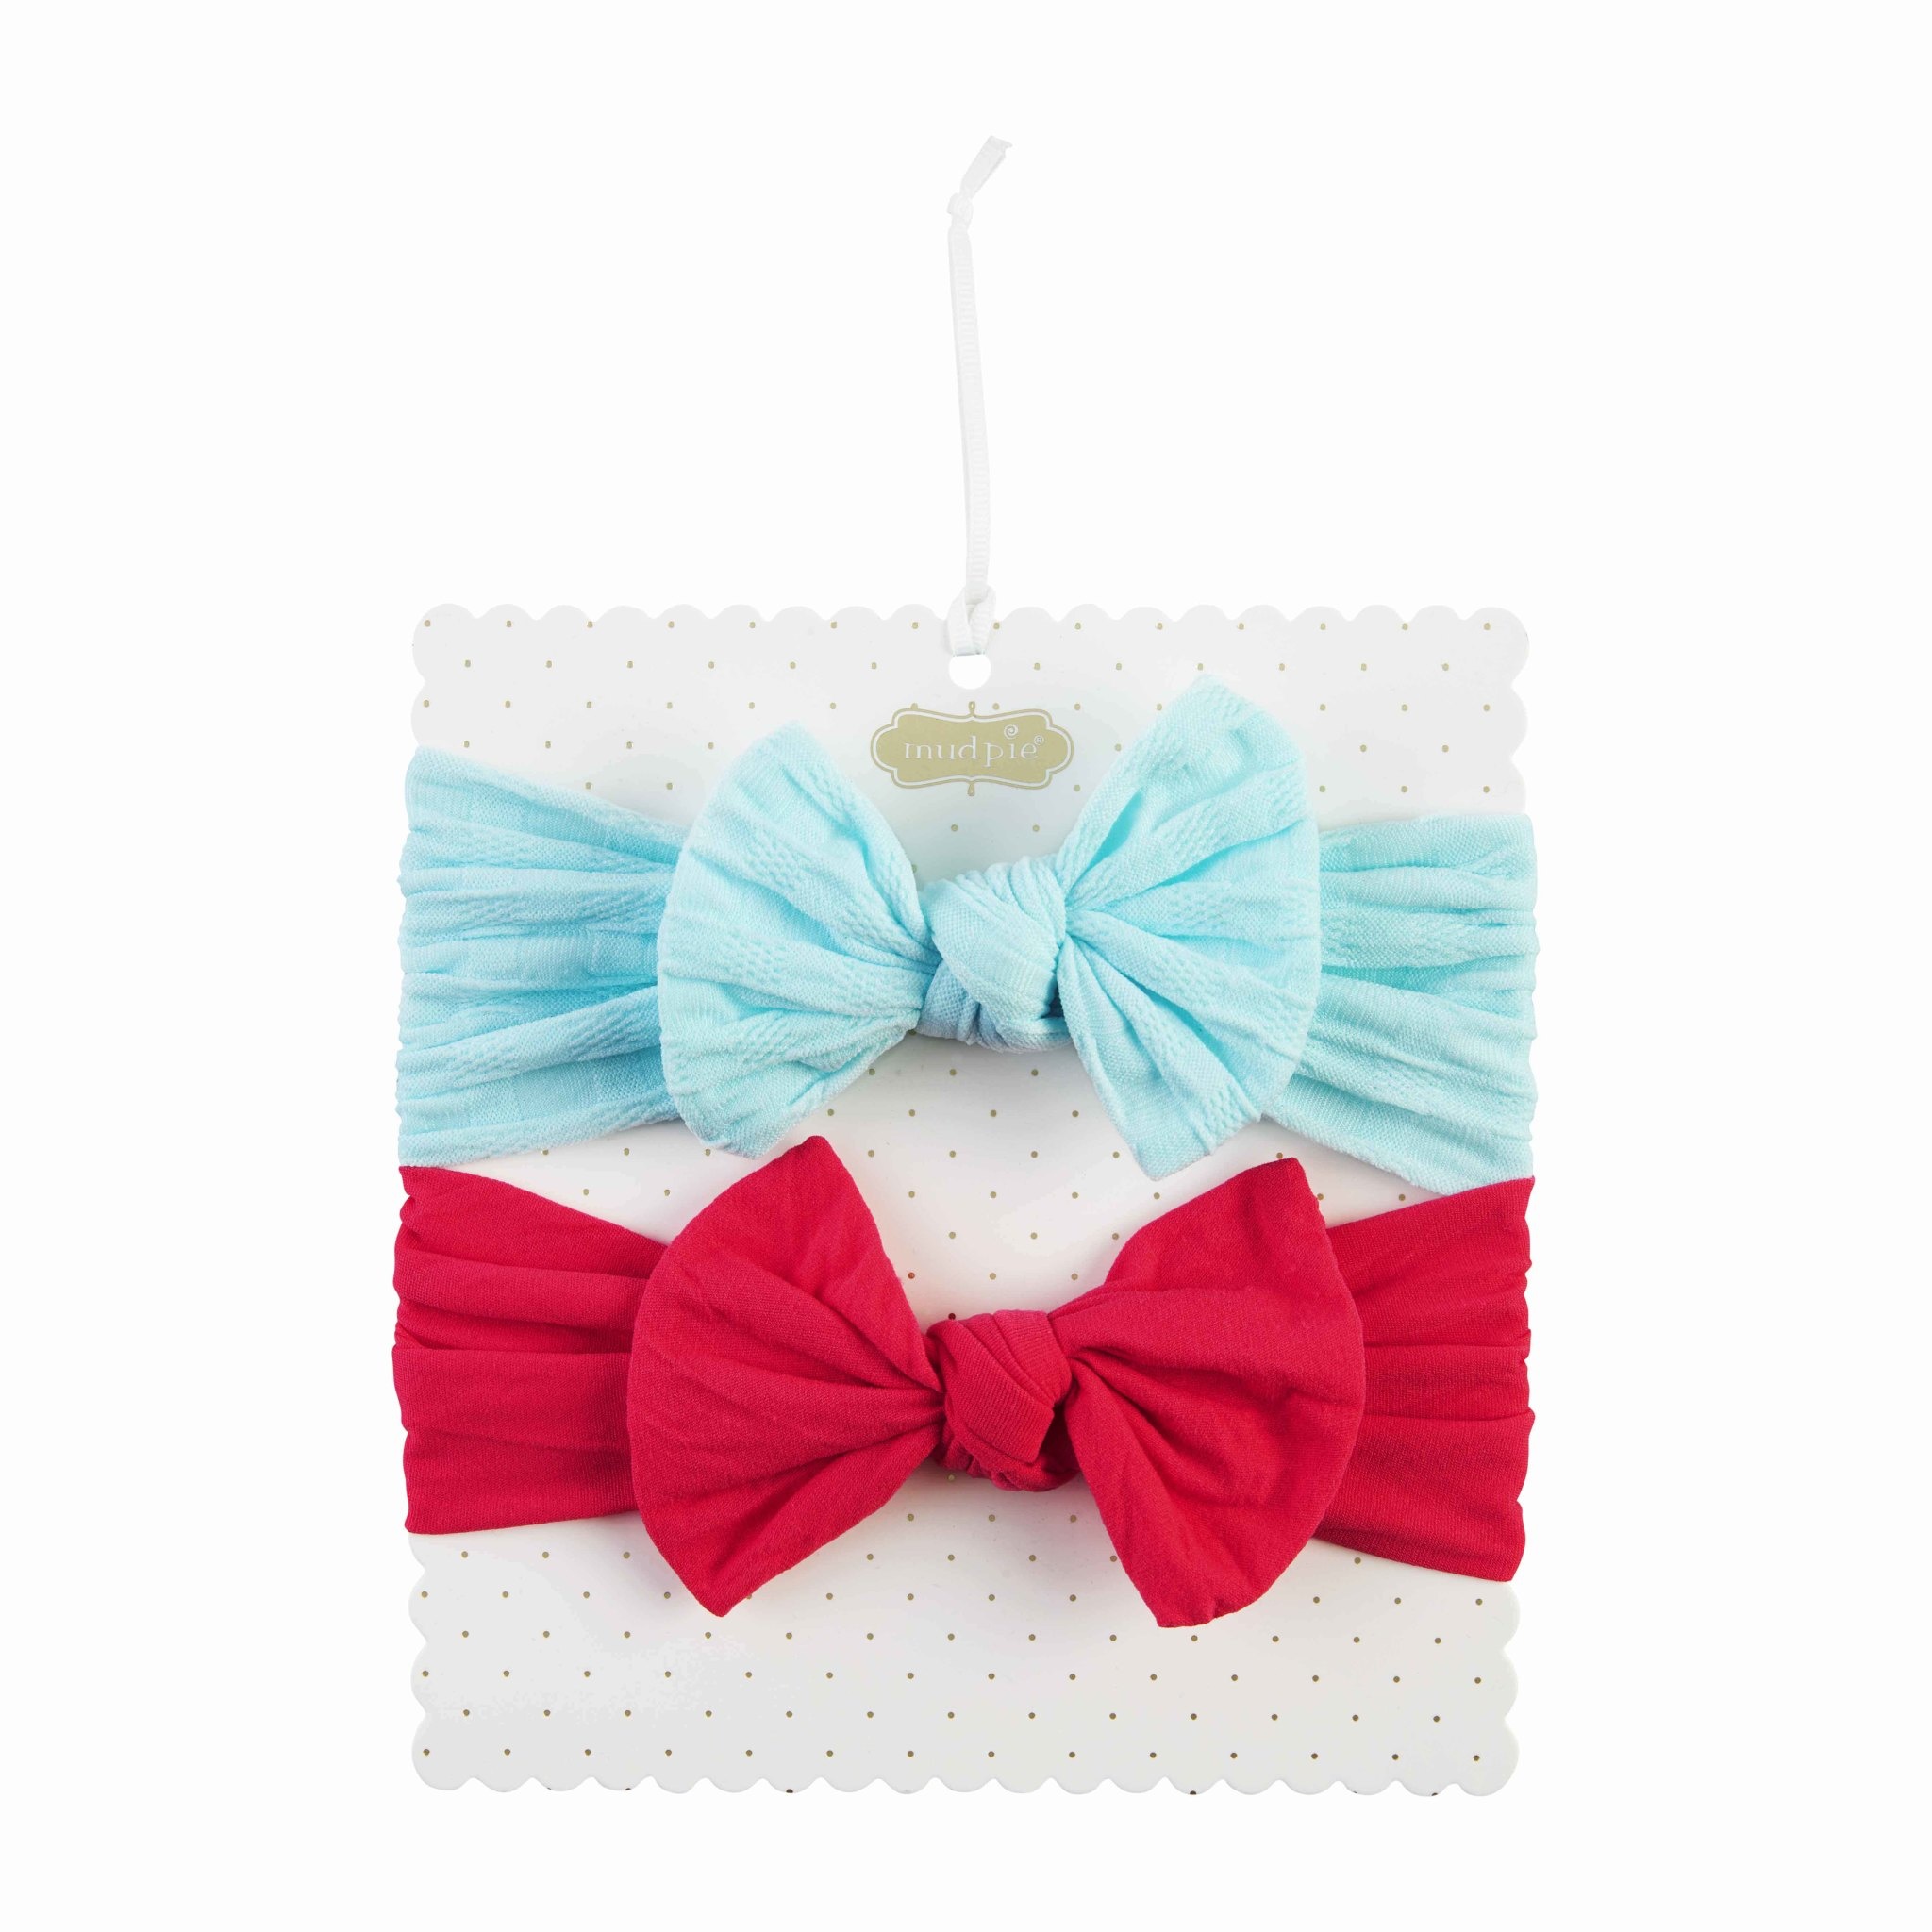 Mud Pie BLUE AND CORAL NYLON BOWS